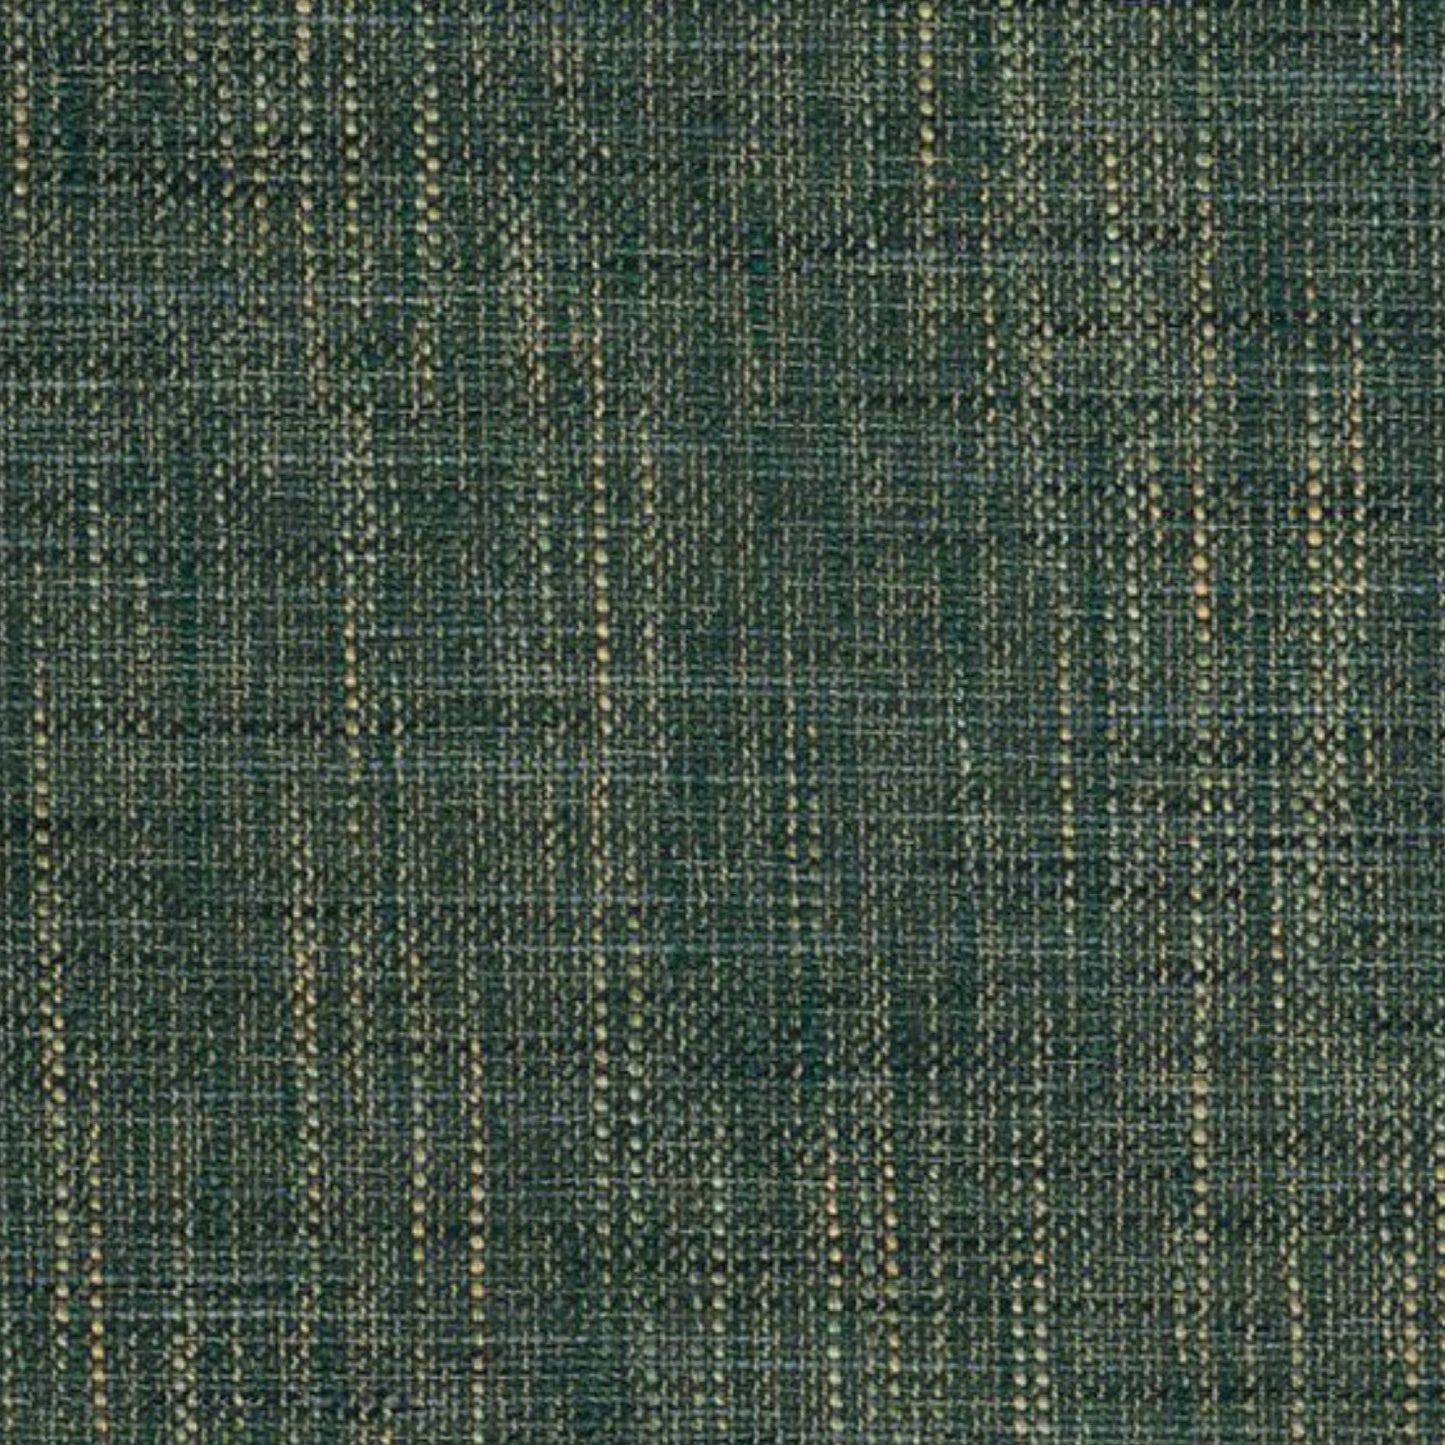 RHODES BAYBERRY FABRIC SAMPLE | PREMIUM COLLECTION